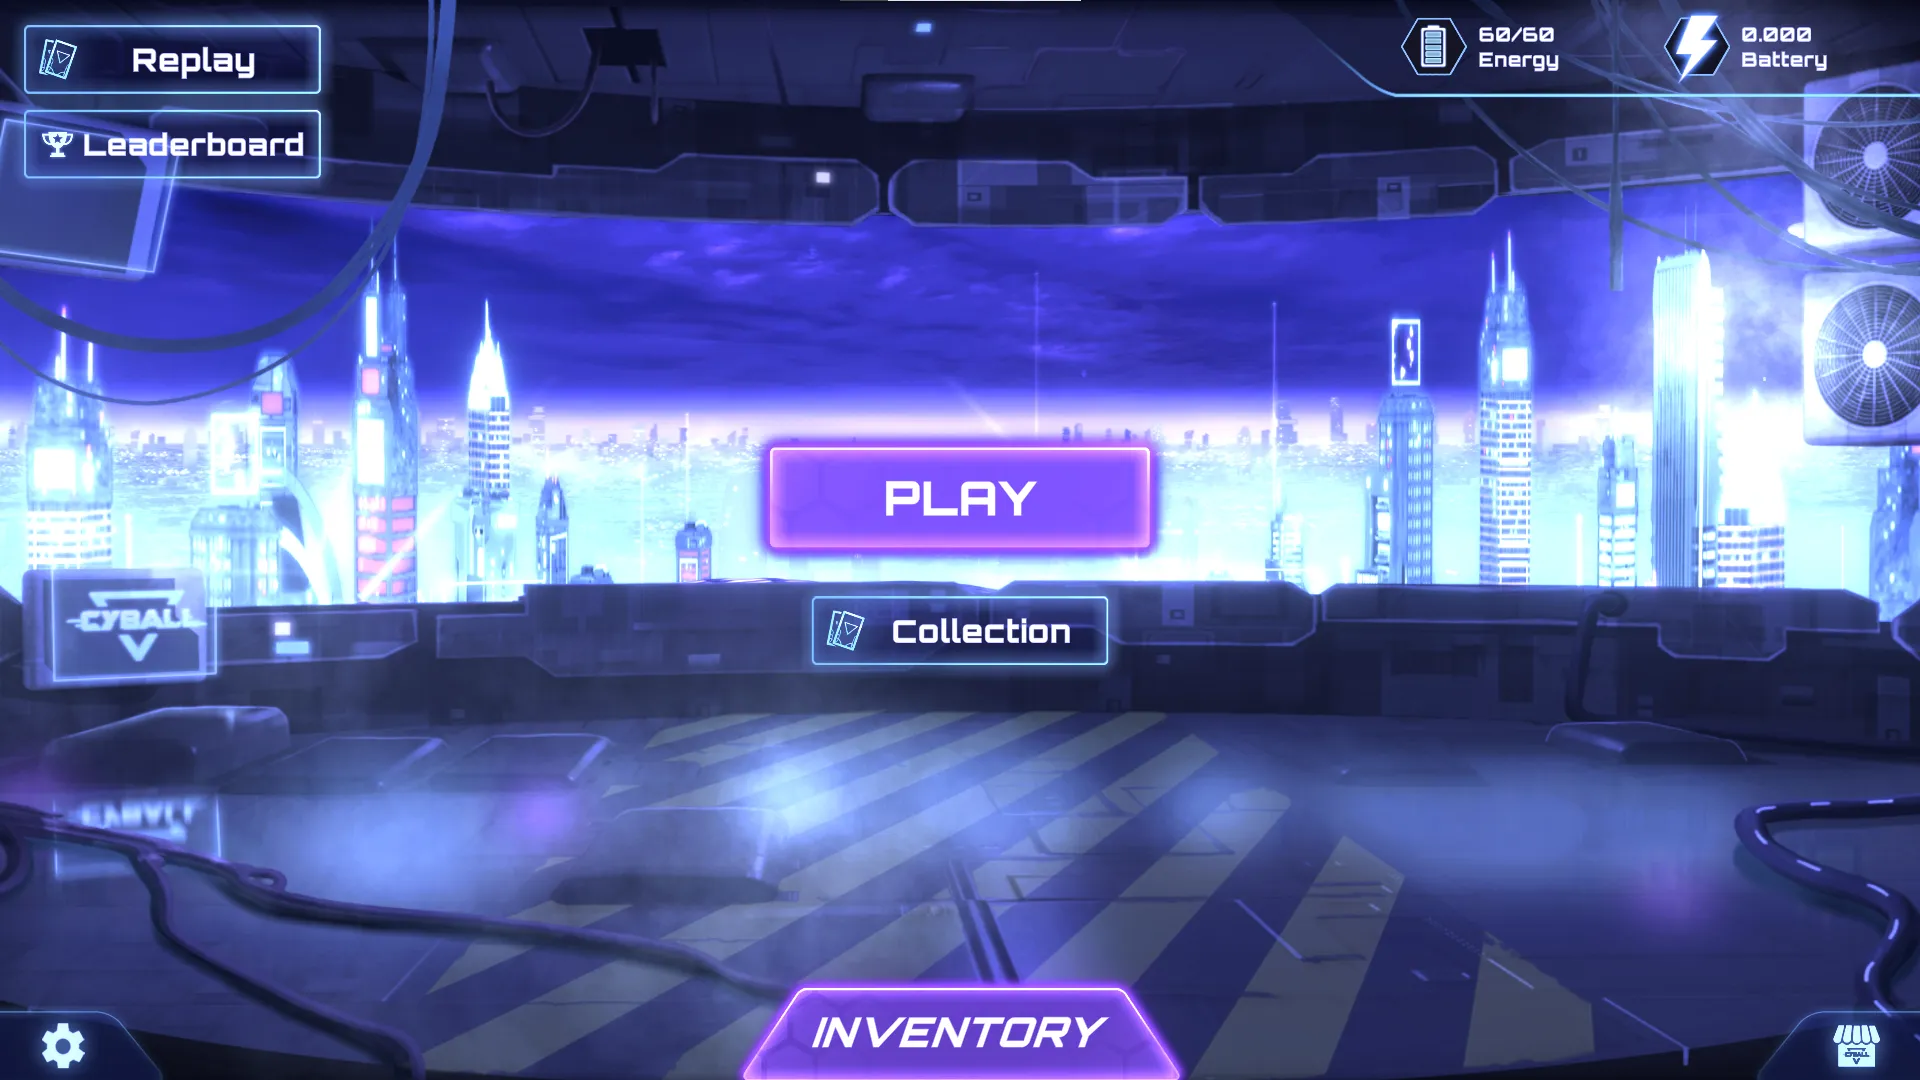 CyBall homescreen serves as the game lobby when the player logs in. It displays the buttons for players to explore and access various features.